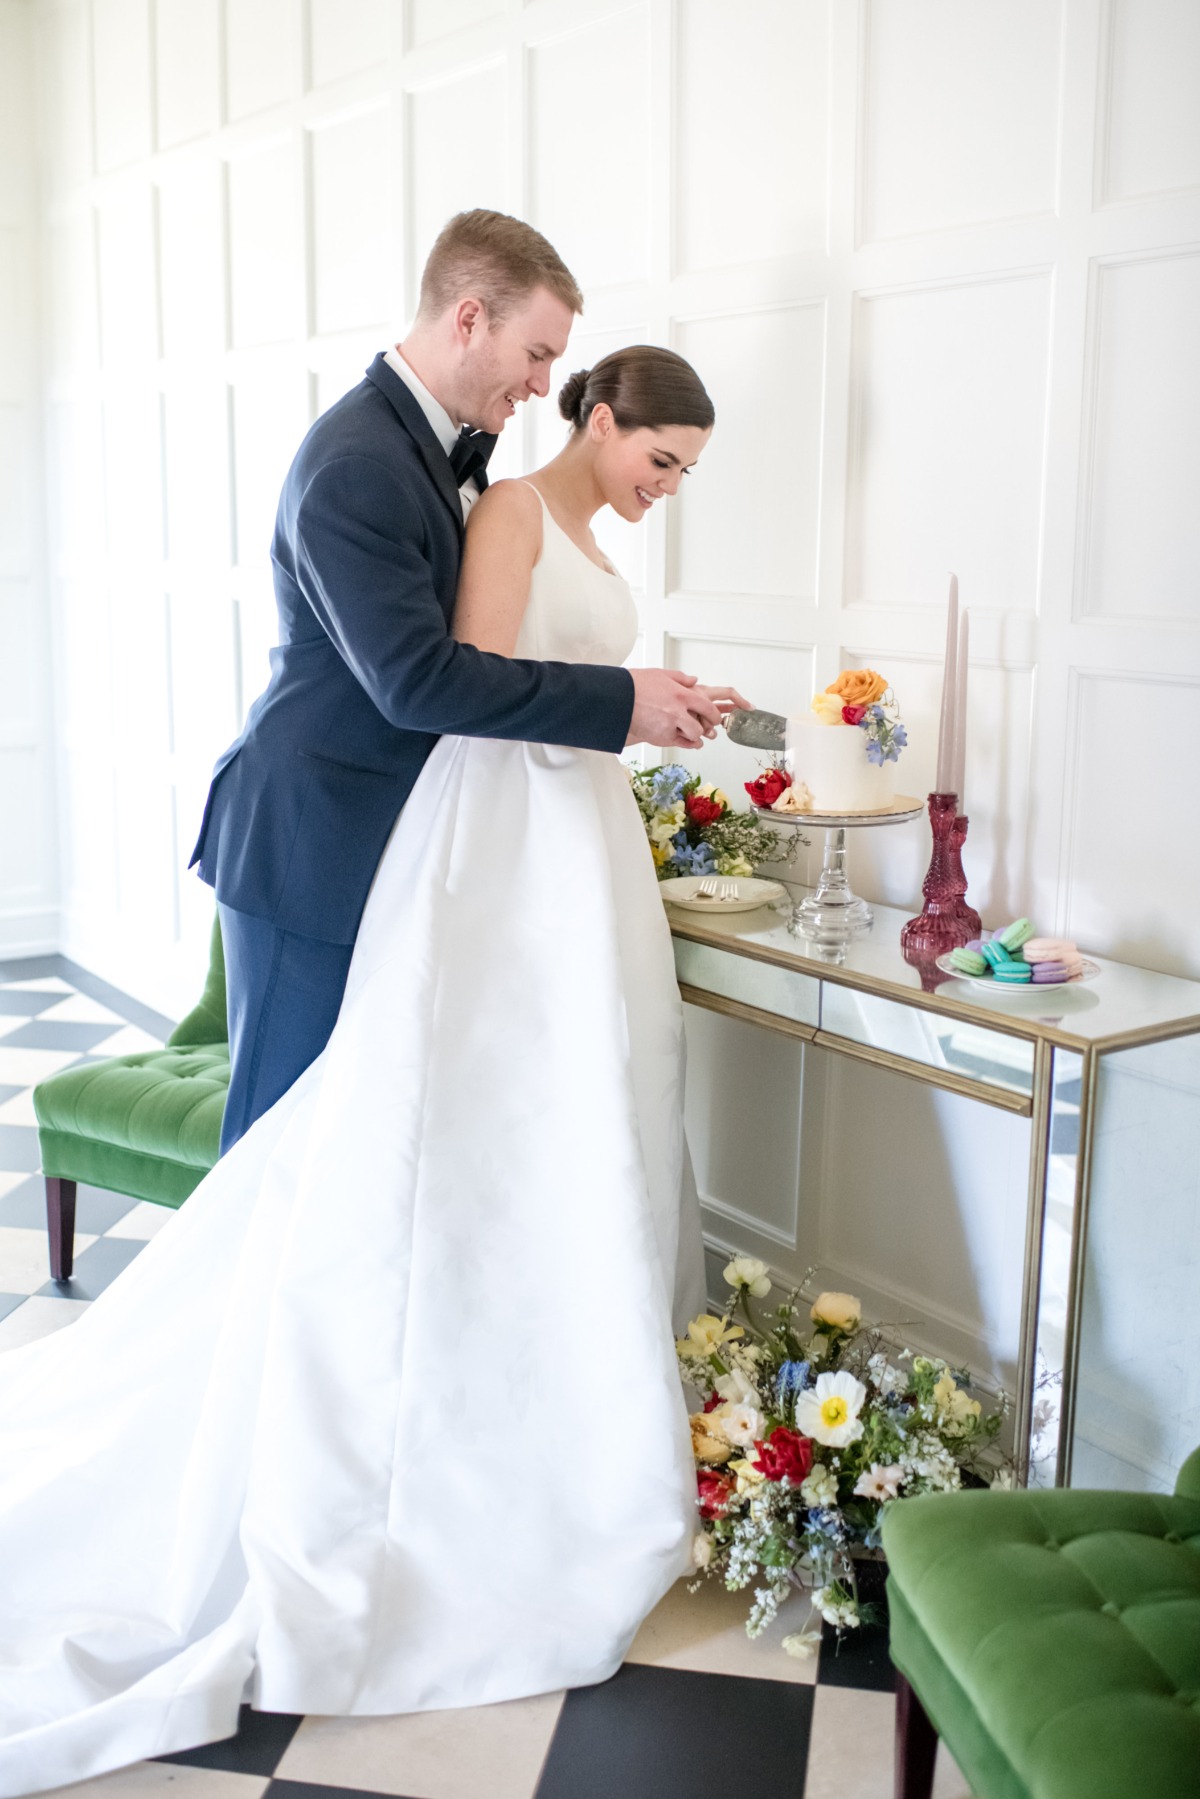 bride and groom cutting wedding cake at elopement